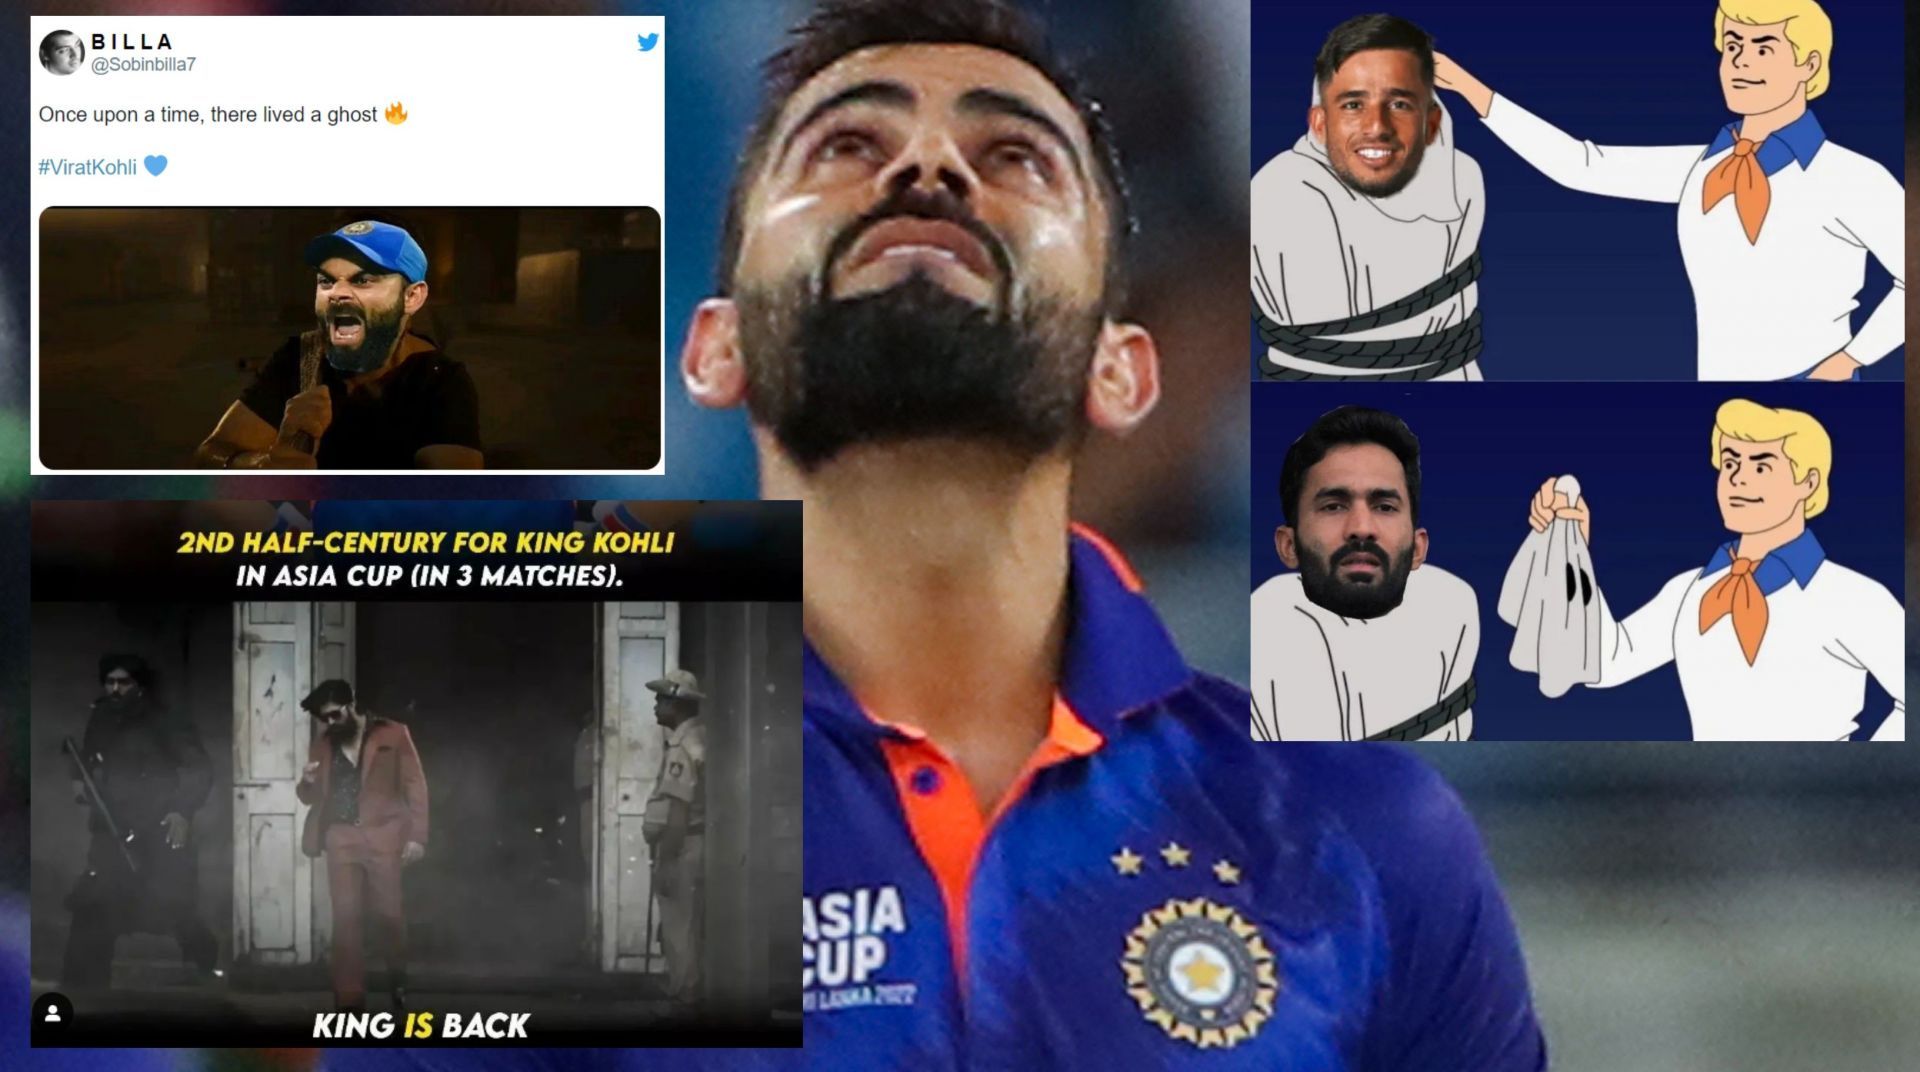 Fans react after Kohli scored his 32nd T20I fifty against Pakistan in Asia Cup 2022